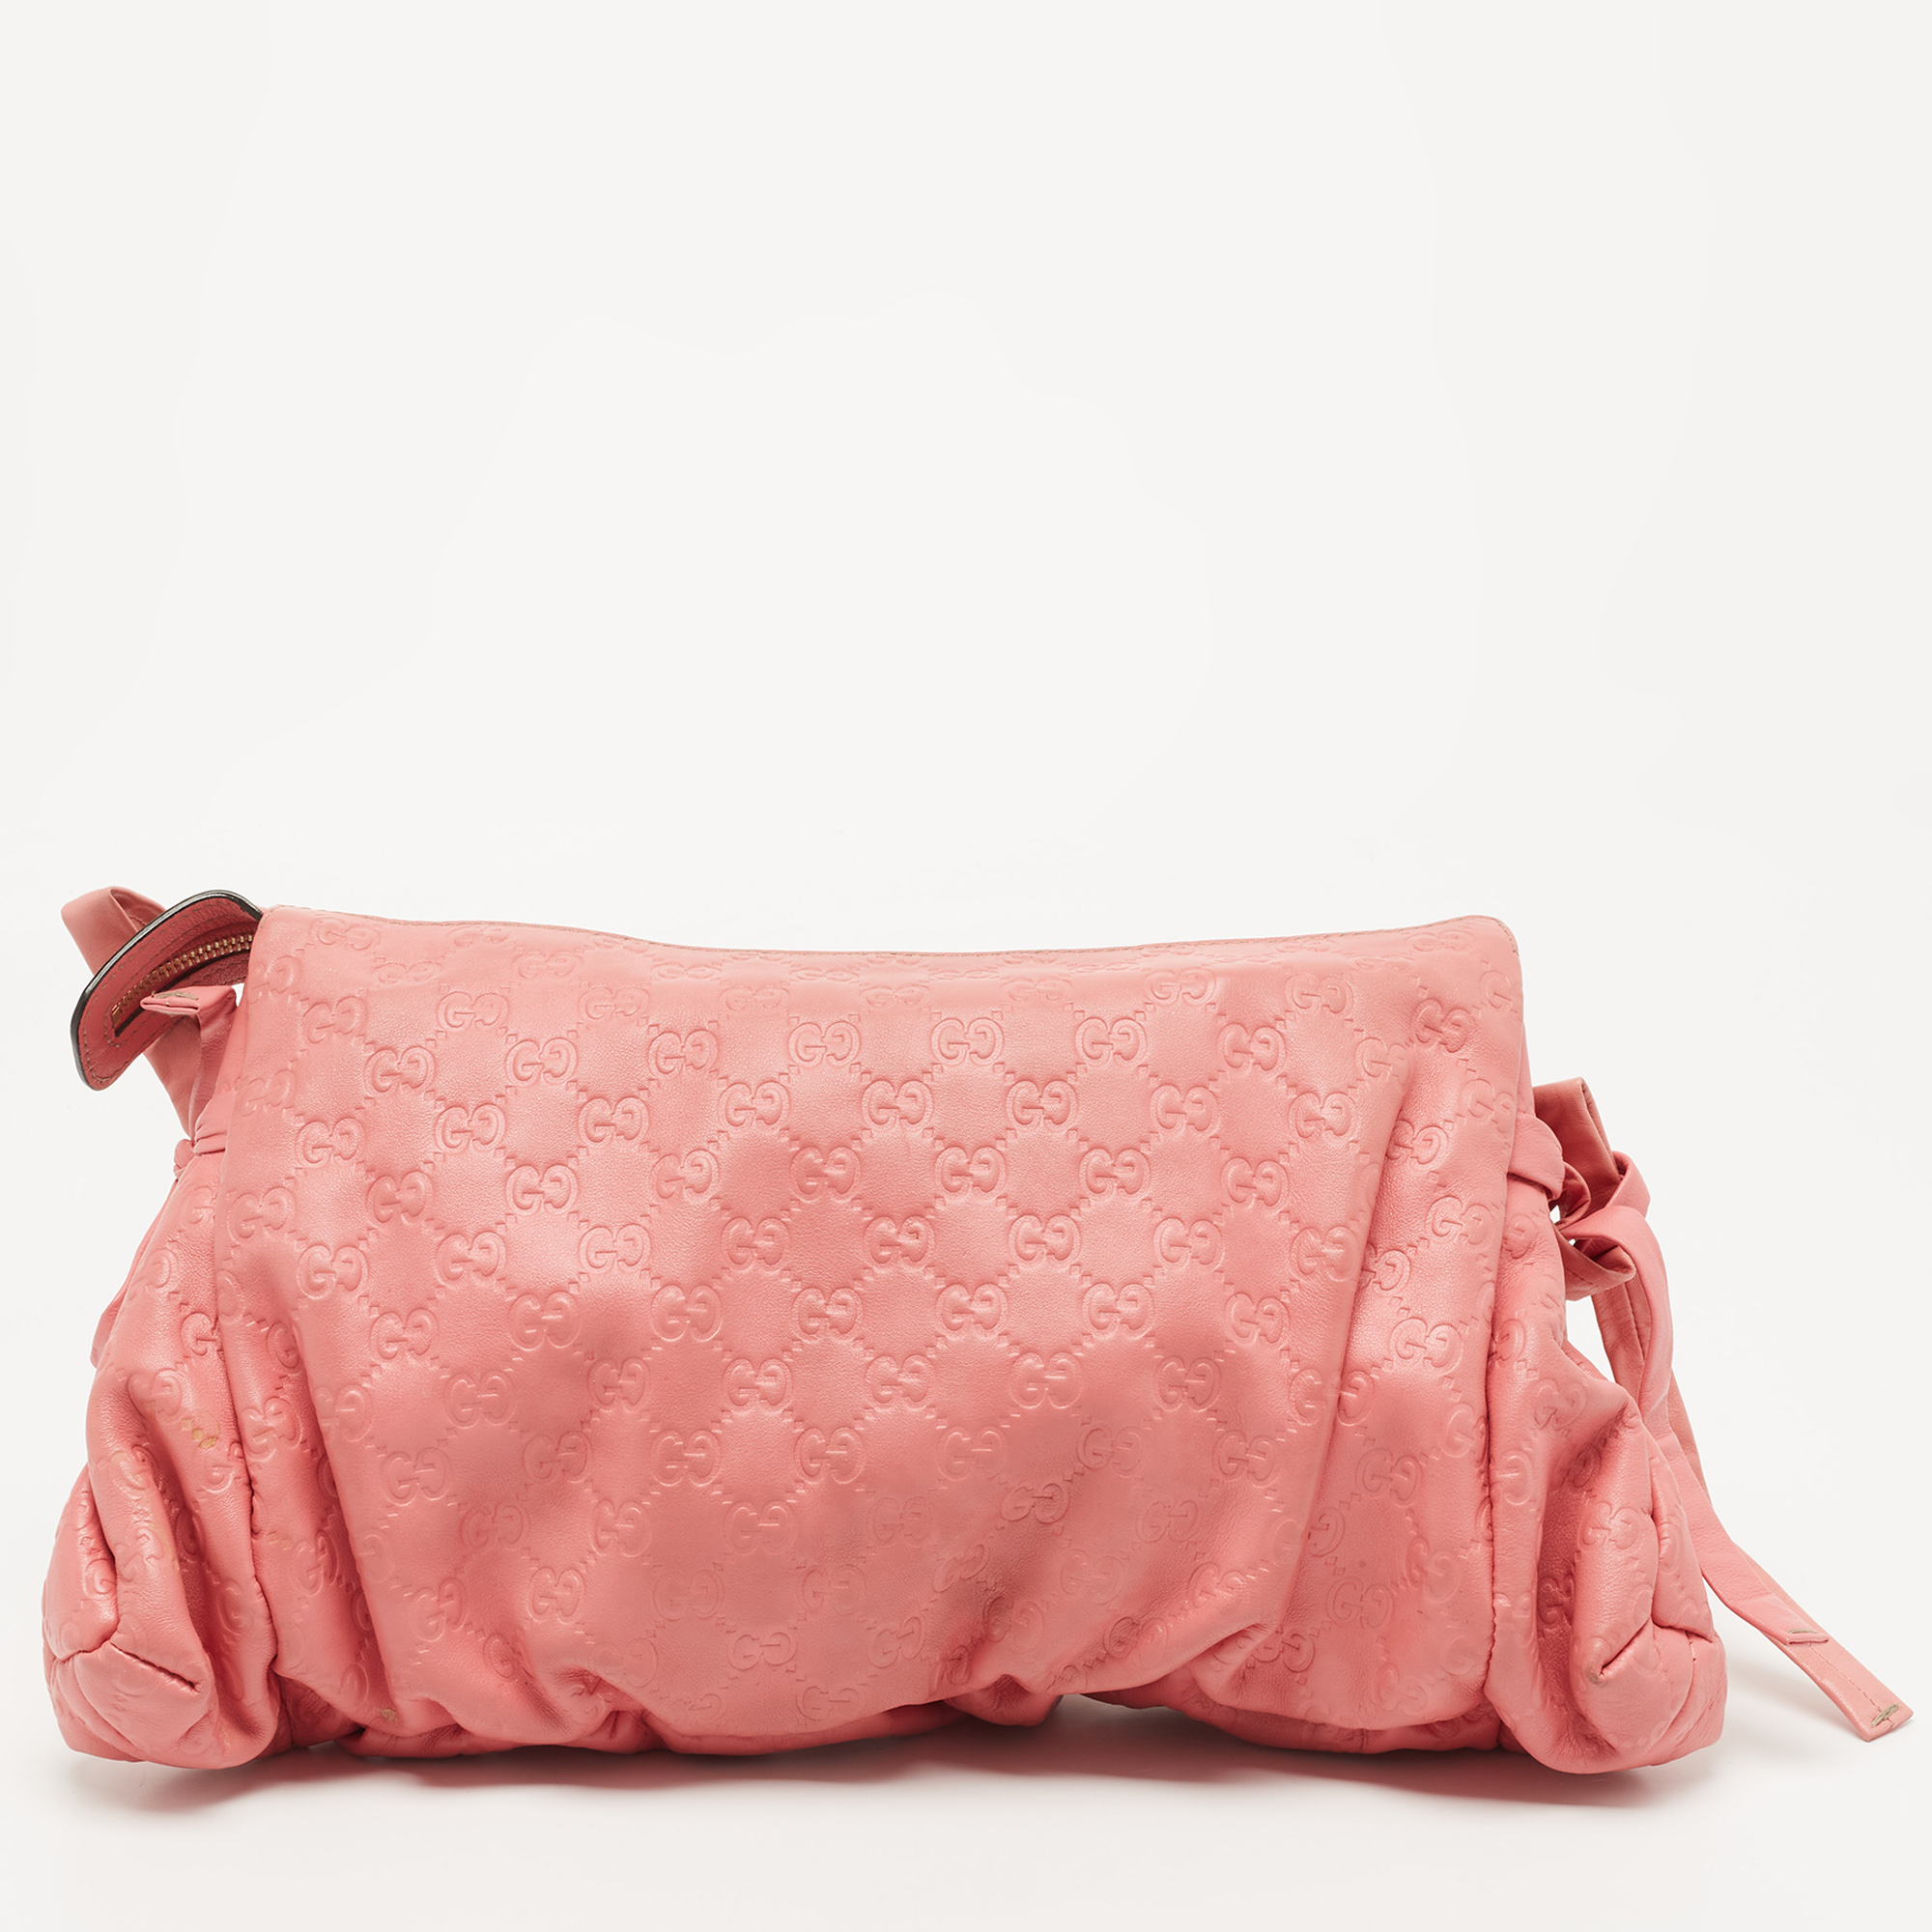 Gucci Pink Guccissima Leather Large Hysteria Wristlet Clutch